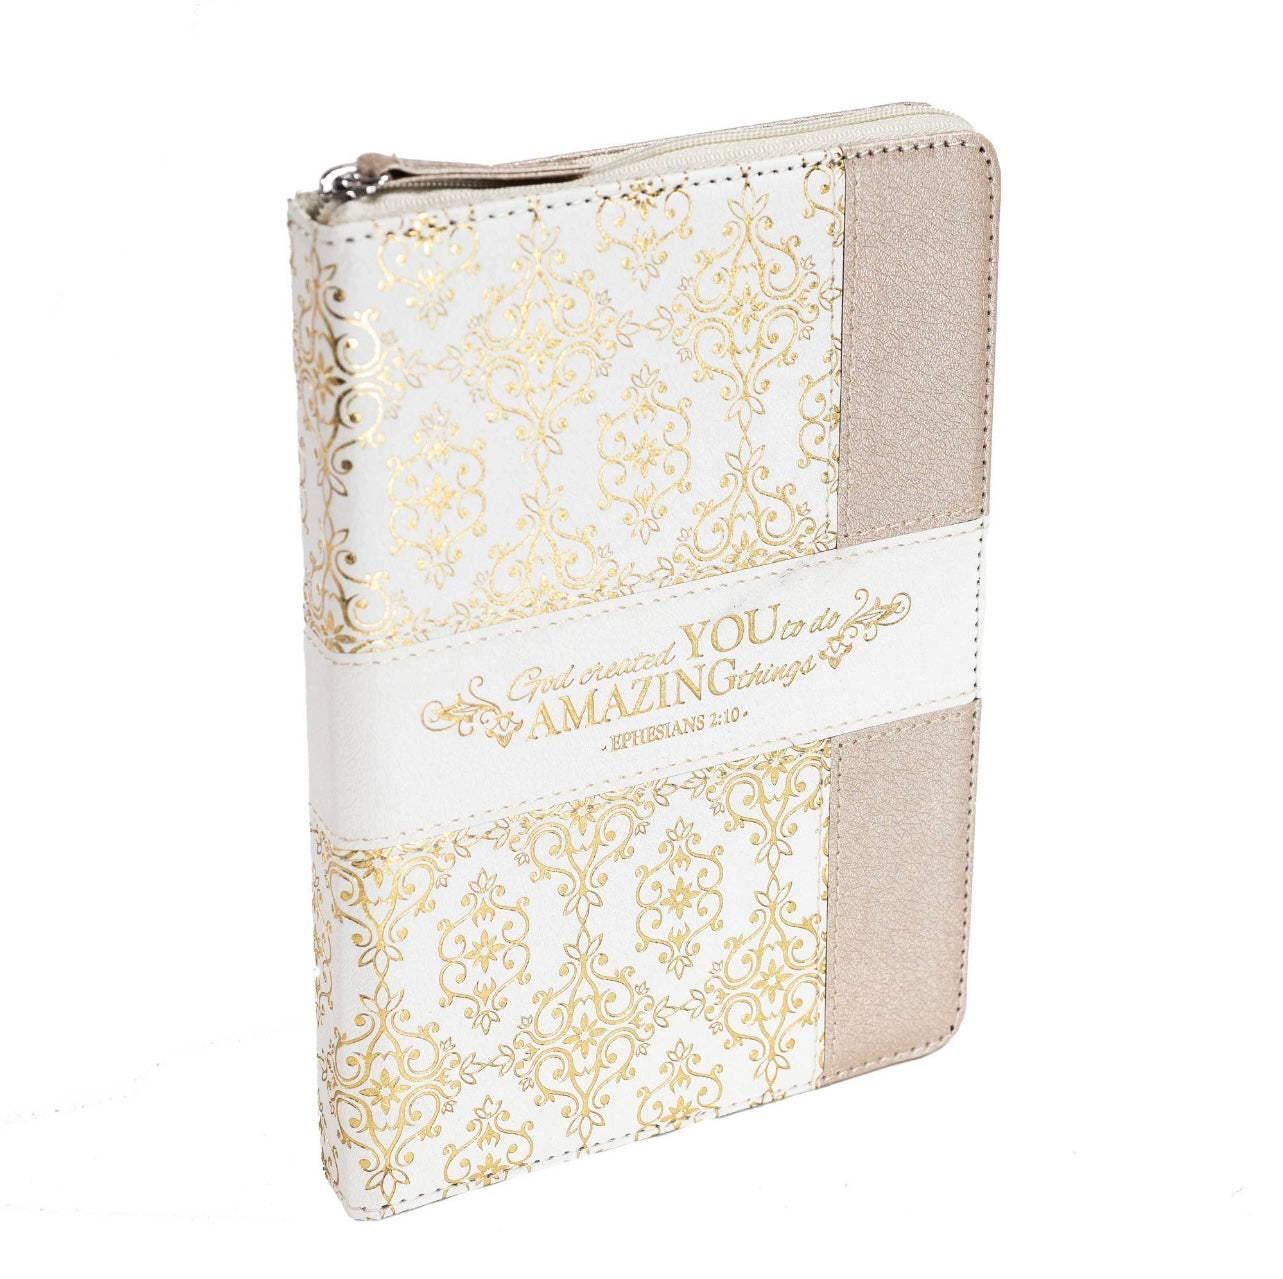 Divine Details: Bible Journal - Cream & Gold "Amazing You"